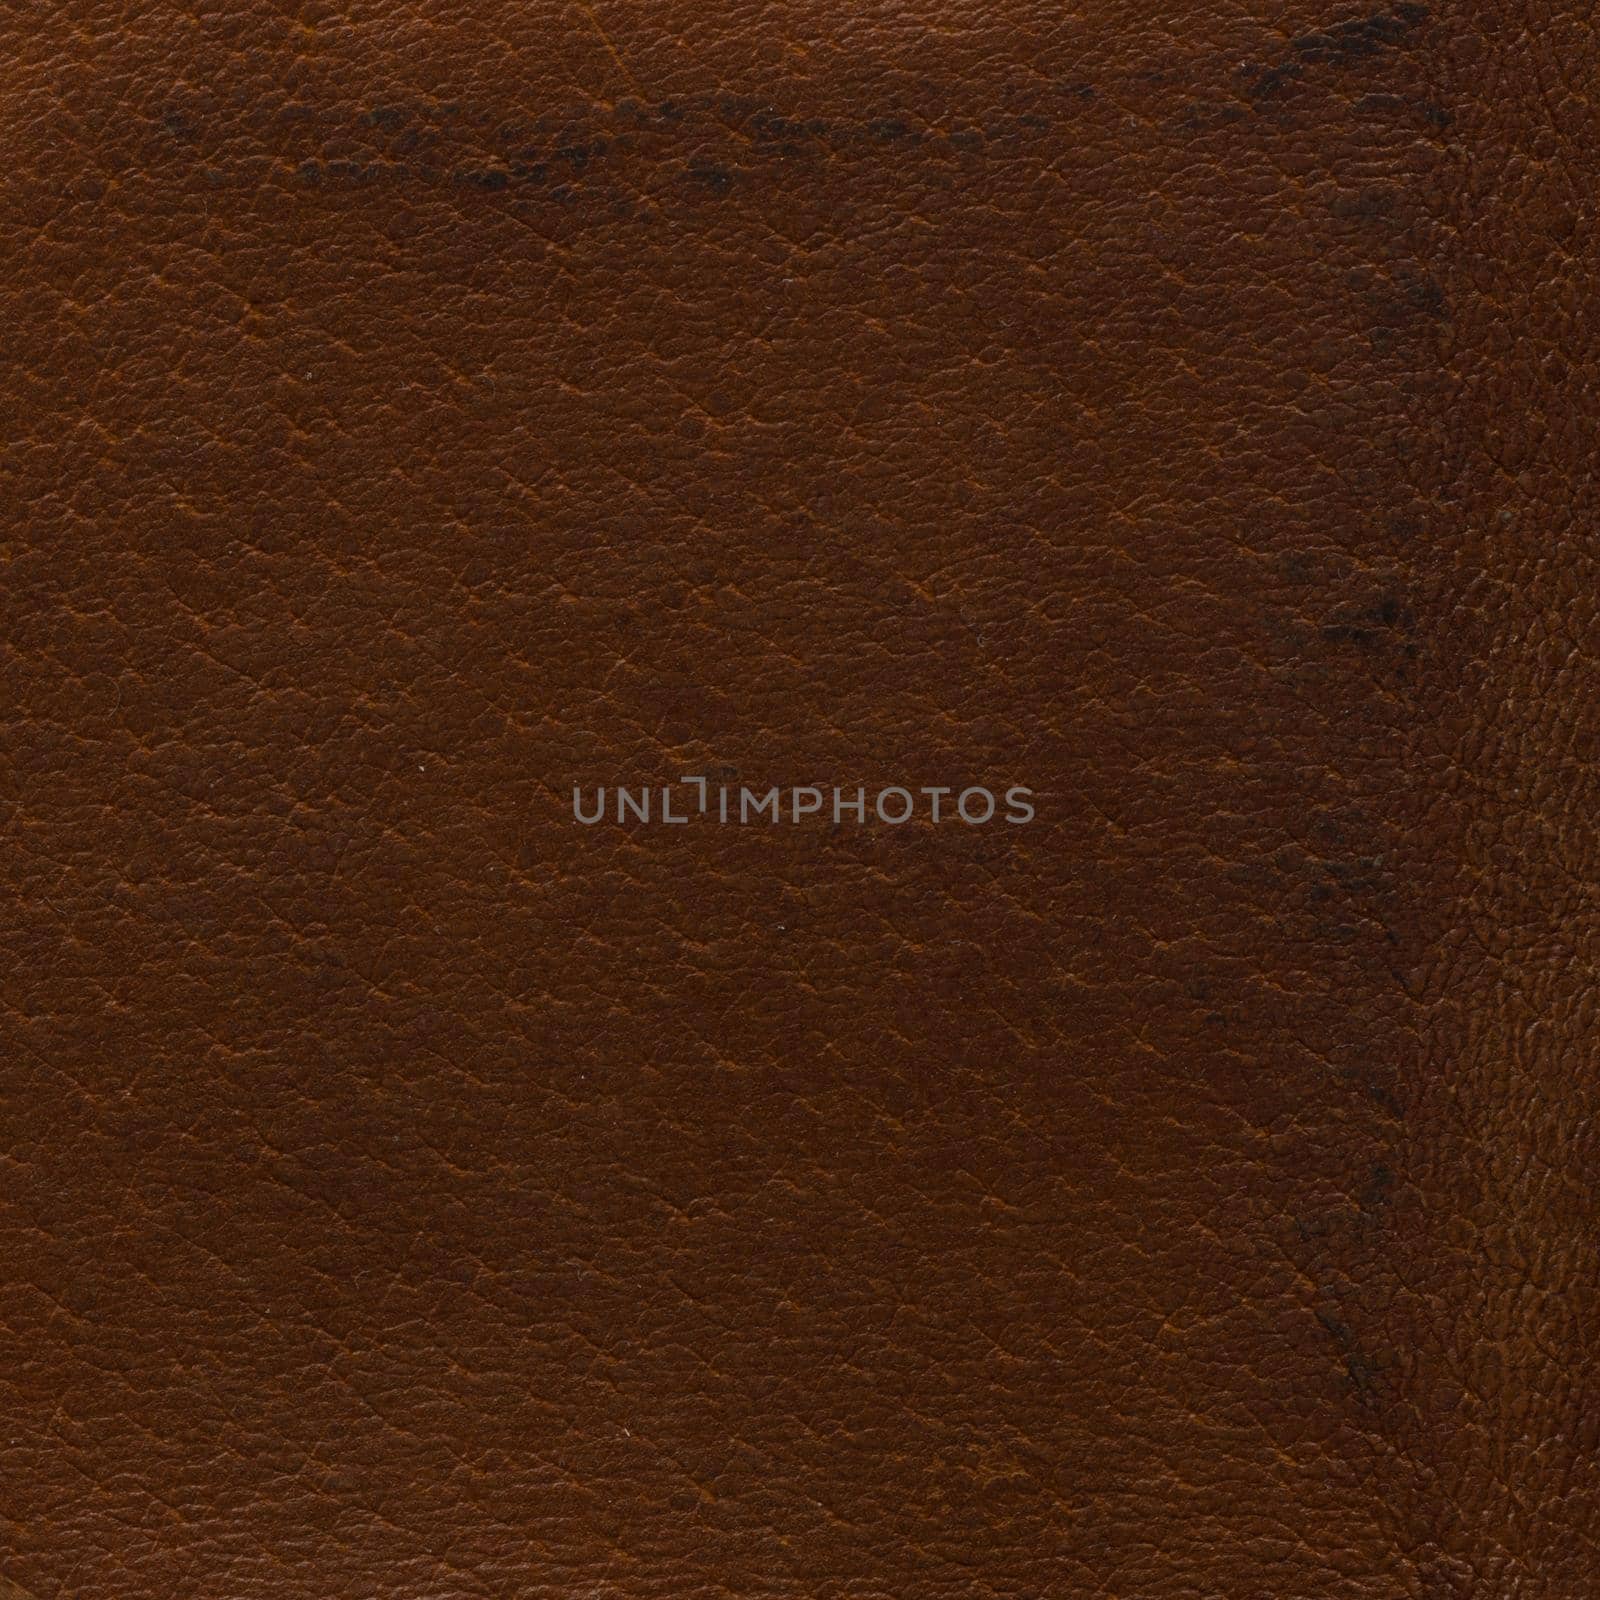 Brown leather texture macro shot - useful as background